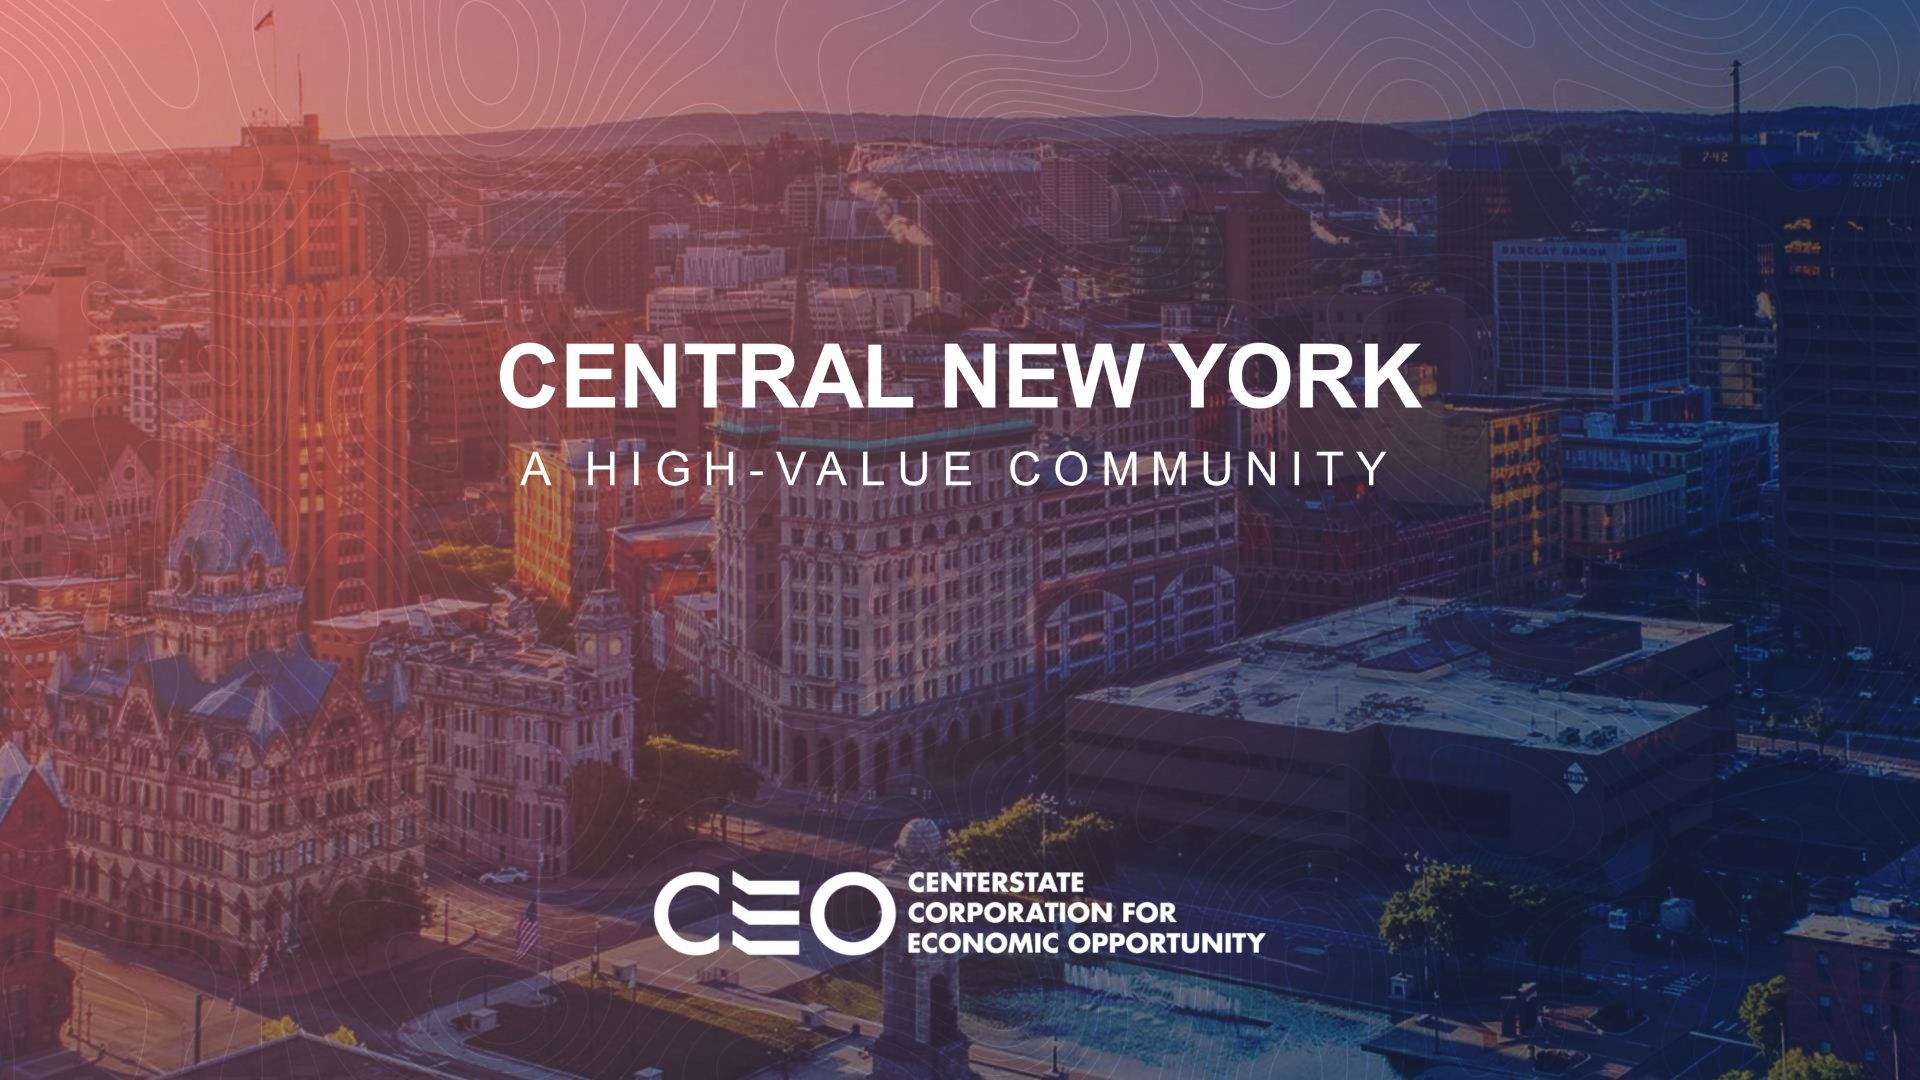 Central New York - A High-Value Community